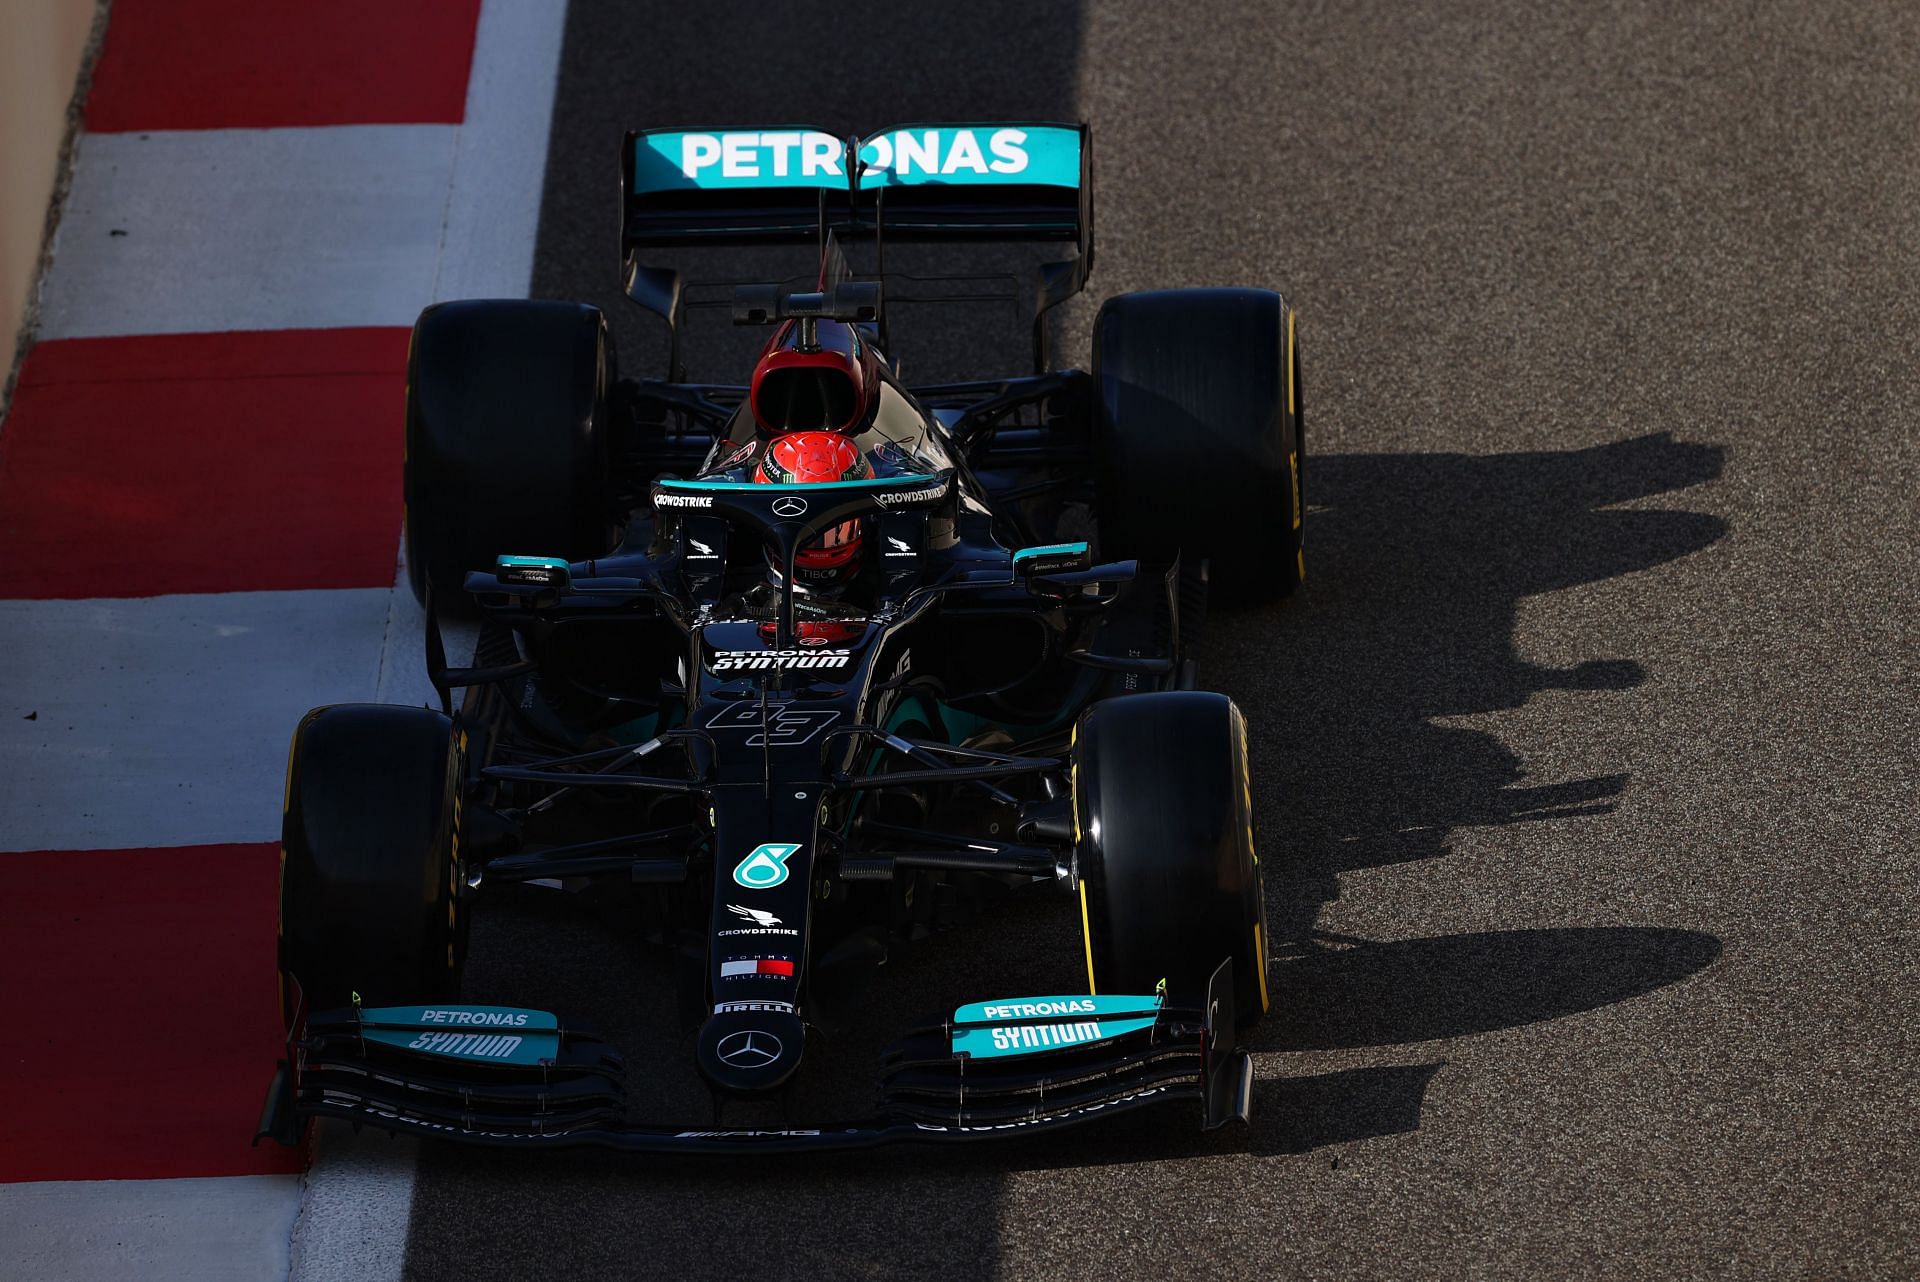 George Russell in the 2021 Mercedes car during the testing at Yas Marina